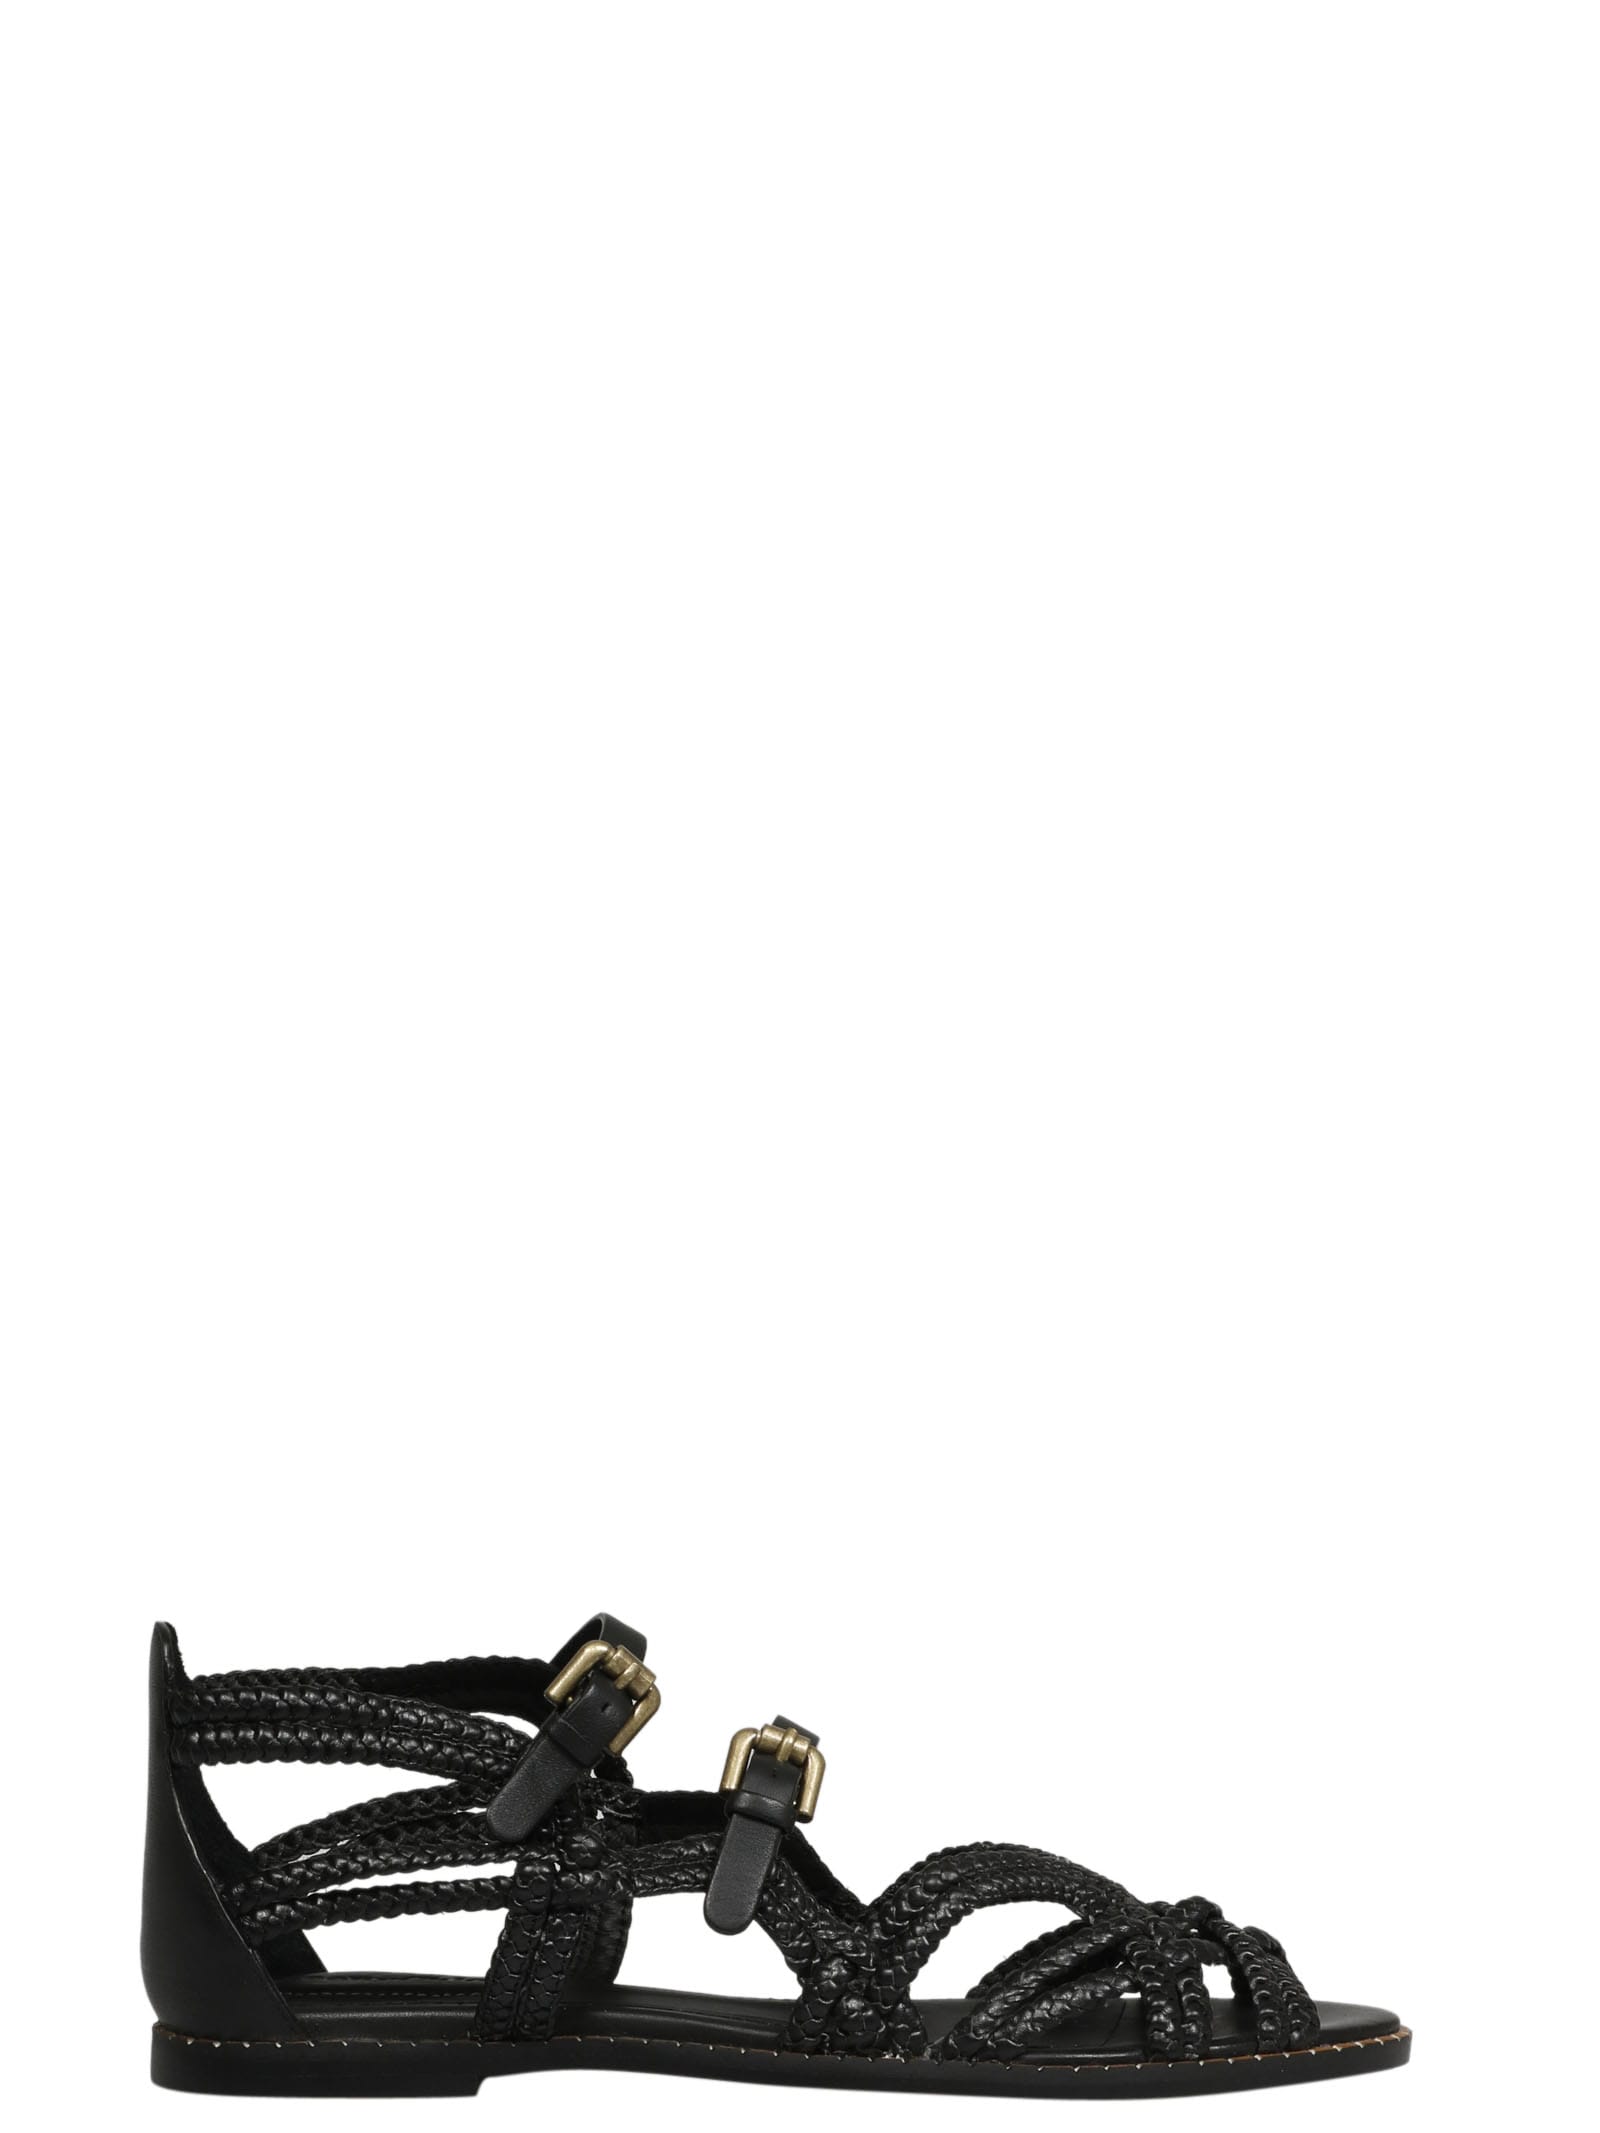 See by Chloé Woven Leather Sandals